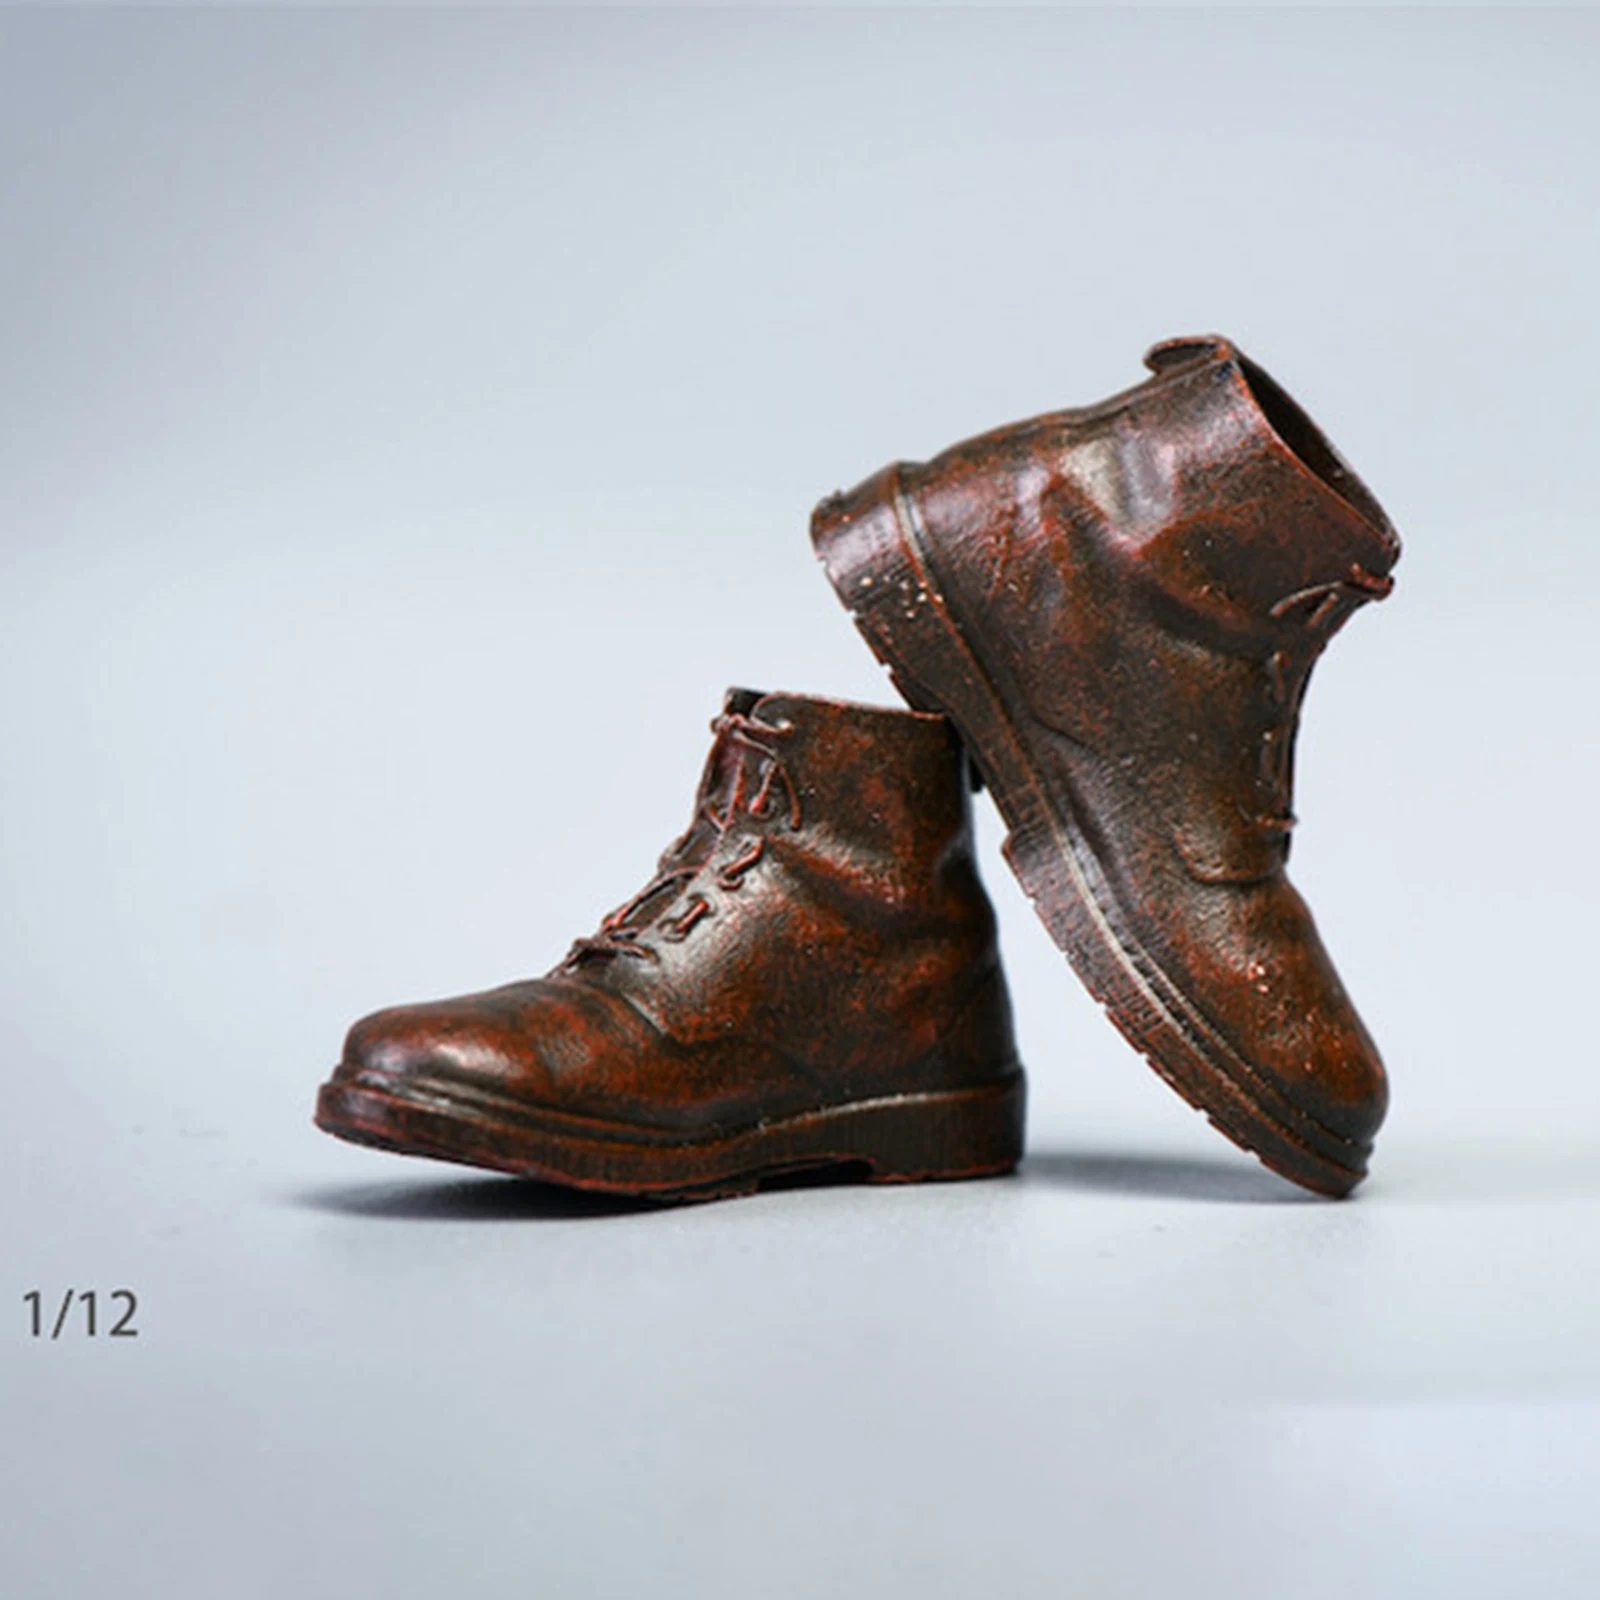 Dollhouse Miniature Tan Leather Work Boots 1:12 Scale 